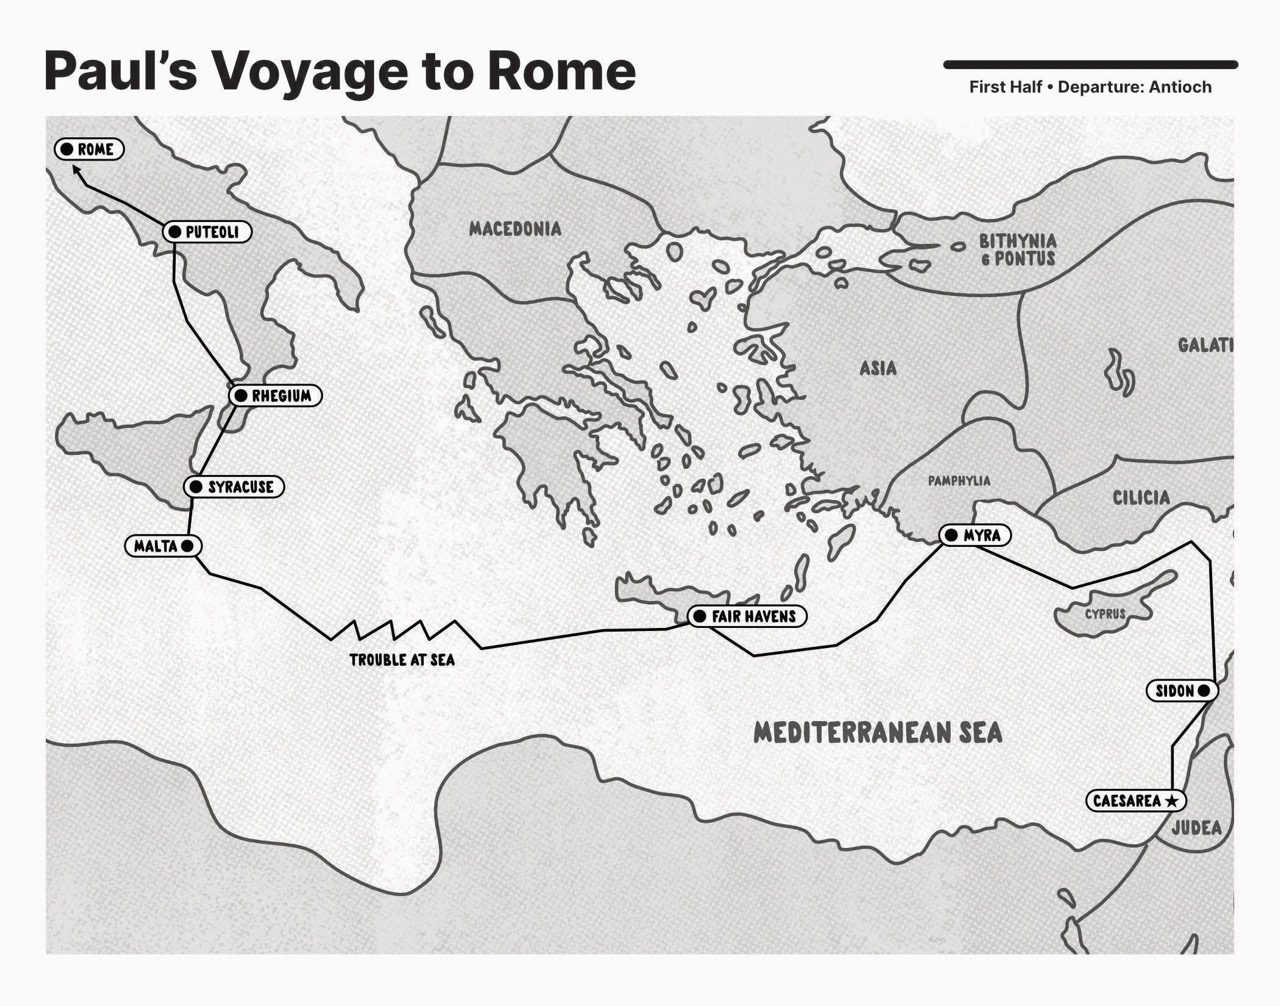 A map of Paul’s journey to Rome